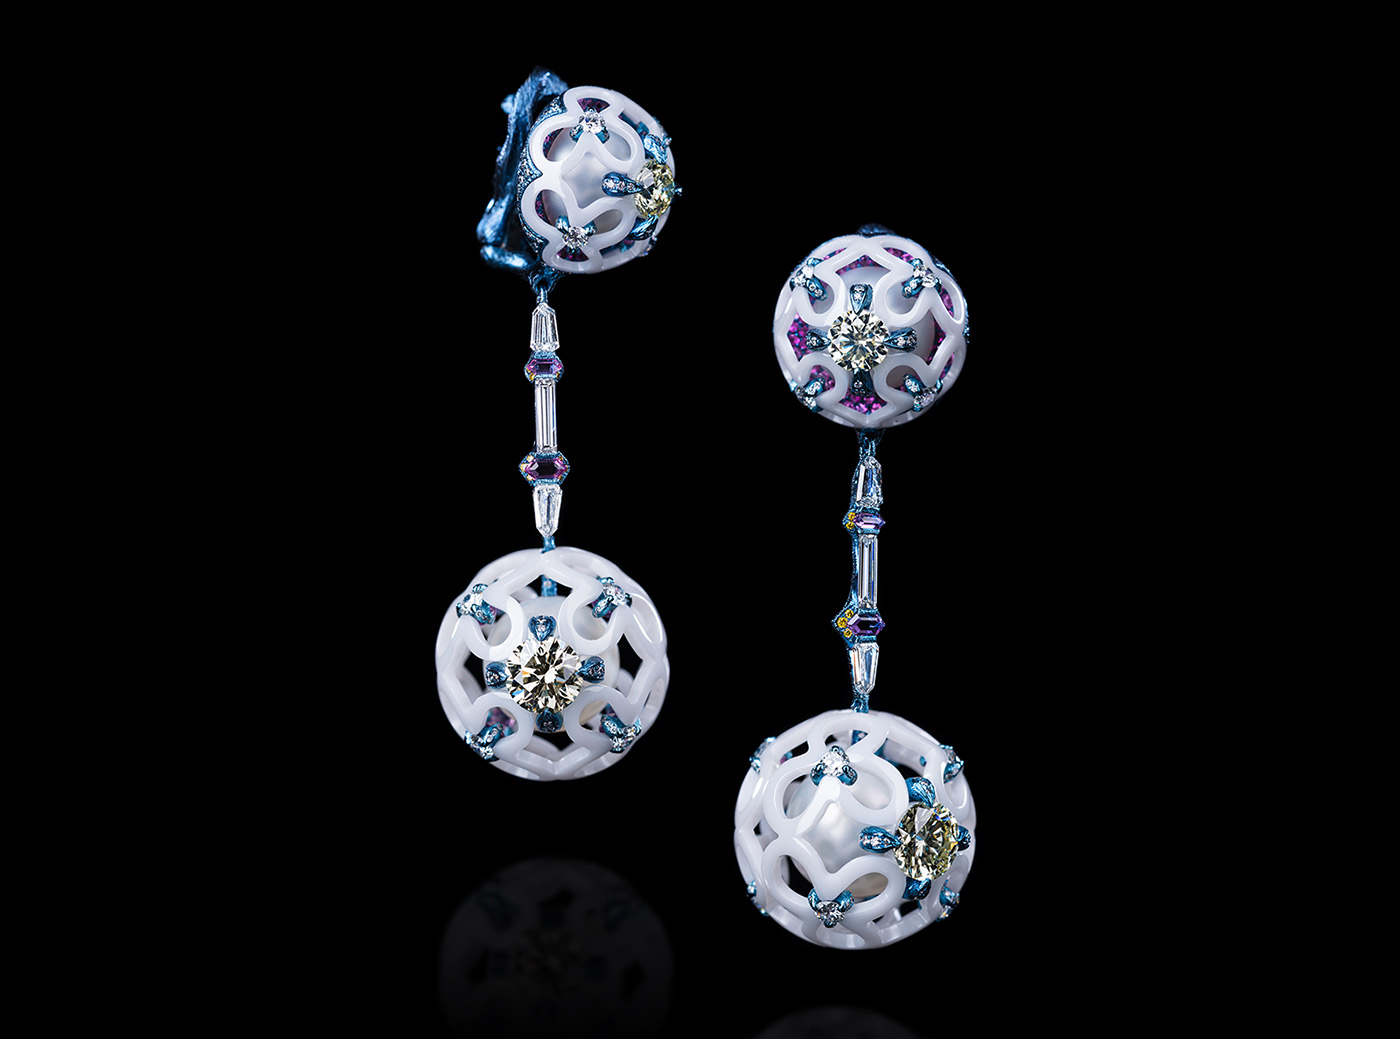 Wallace Chan ‘Multiverse’ earrings with South Sea Pearls totaling 58.45ct, fancy yellow diamond, diamond and pink sapphire in titanium and Wallace Chan Porcelain